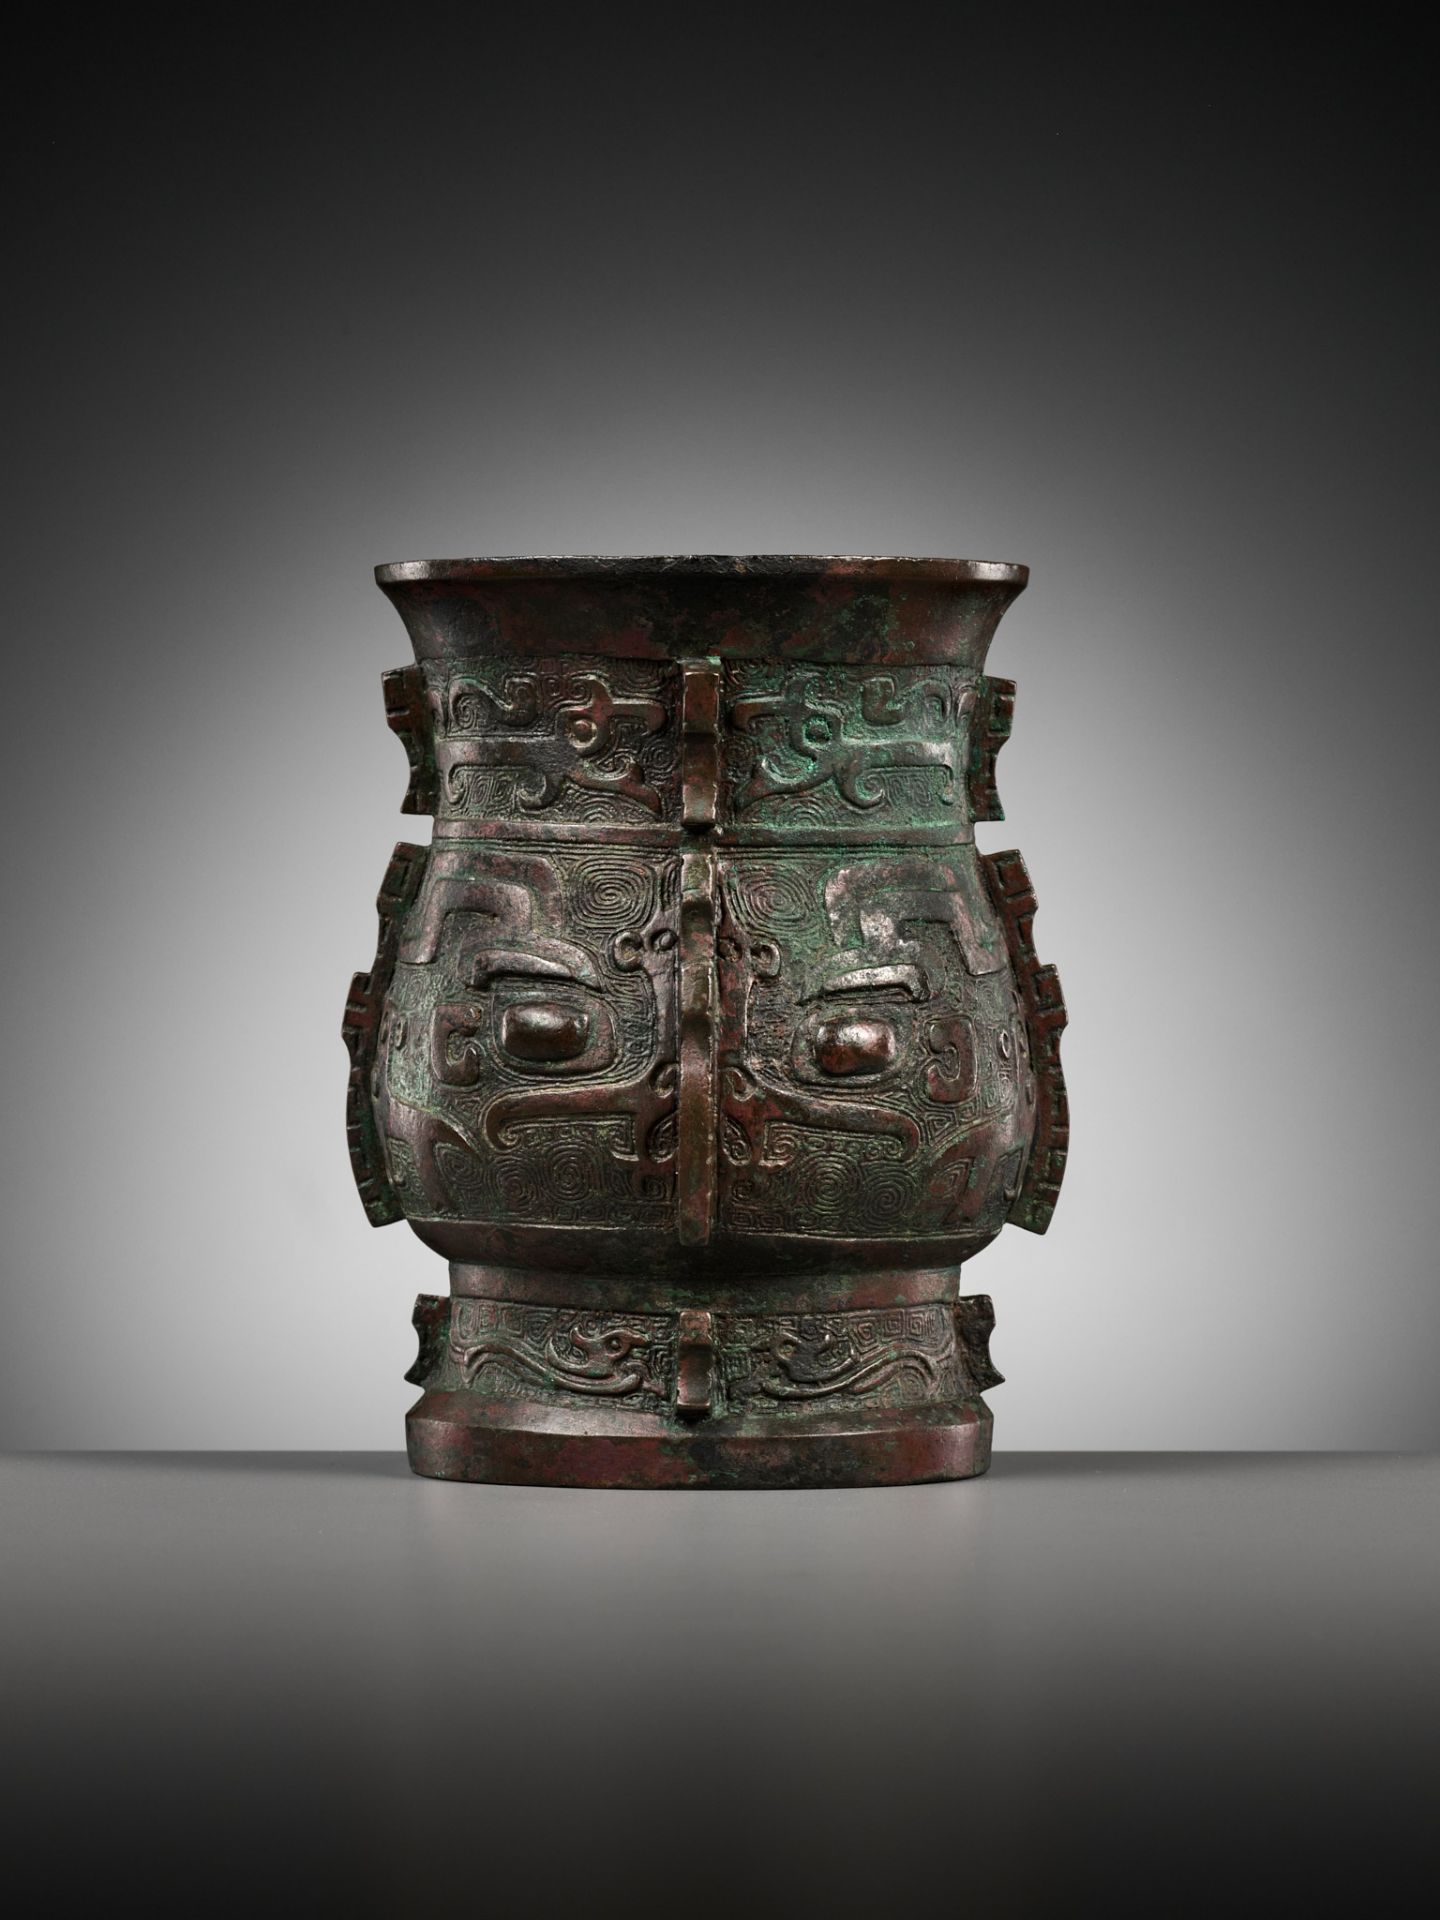 A RARE BRONZE RITUAL WINE VESSEL, ZHI, SHANG DYNASTY, CHINA, 13TH-12TH CENTURY BC - Image 25 of 25